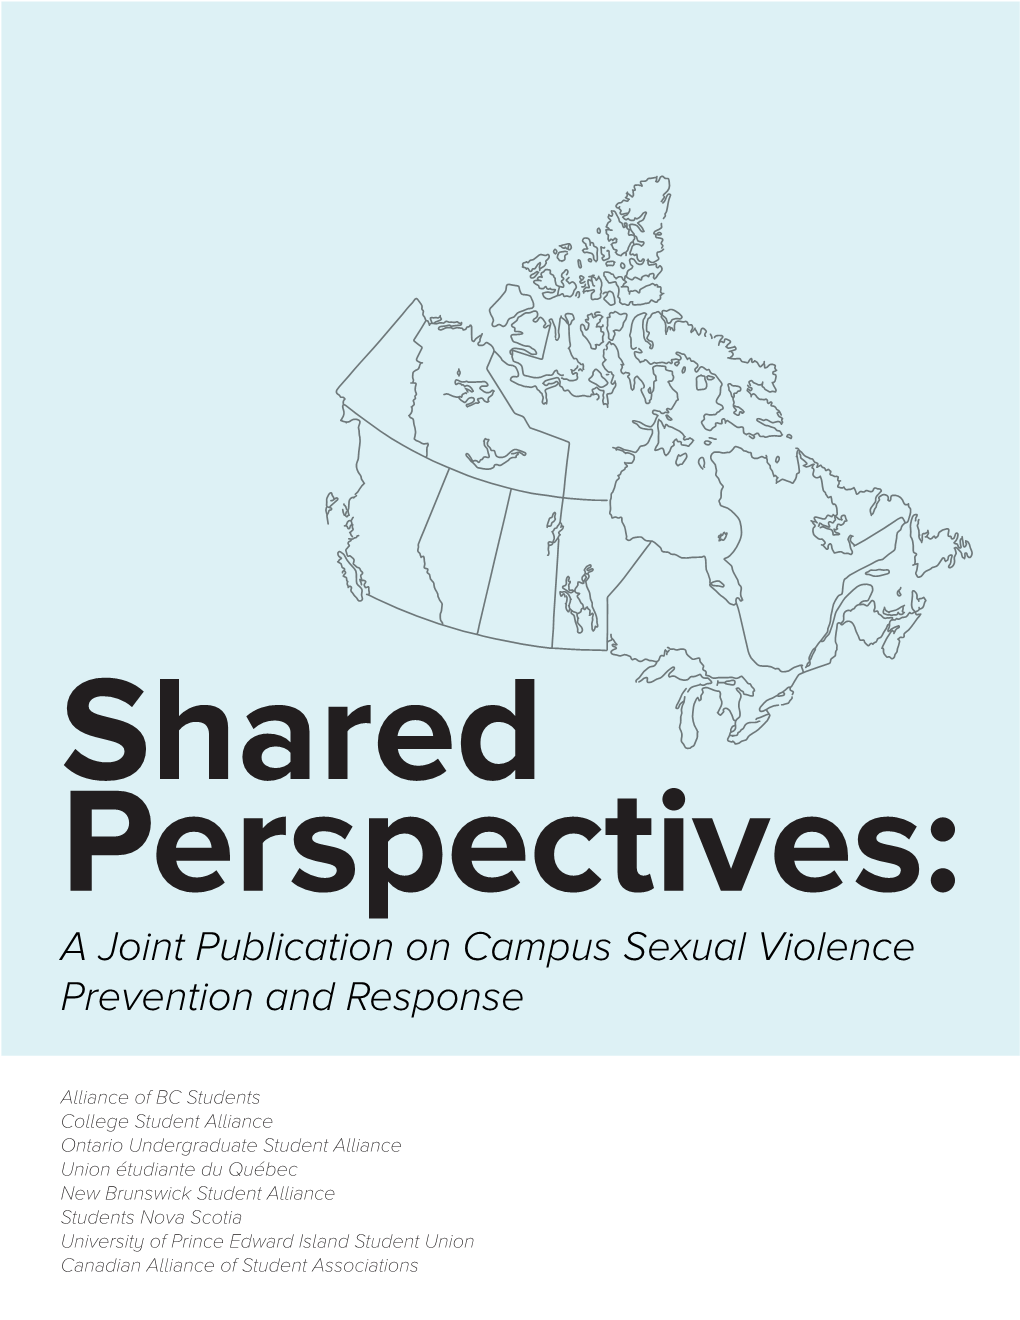 A Joint Publication on Campus Sexual Violence Prevention and Response